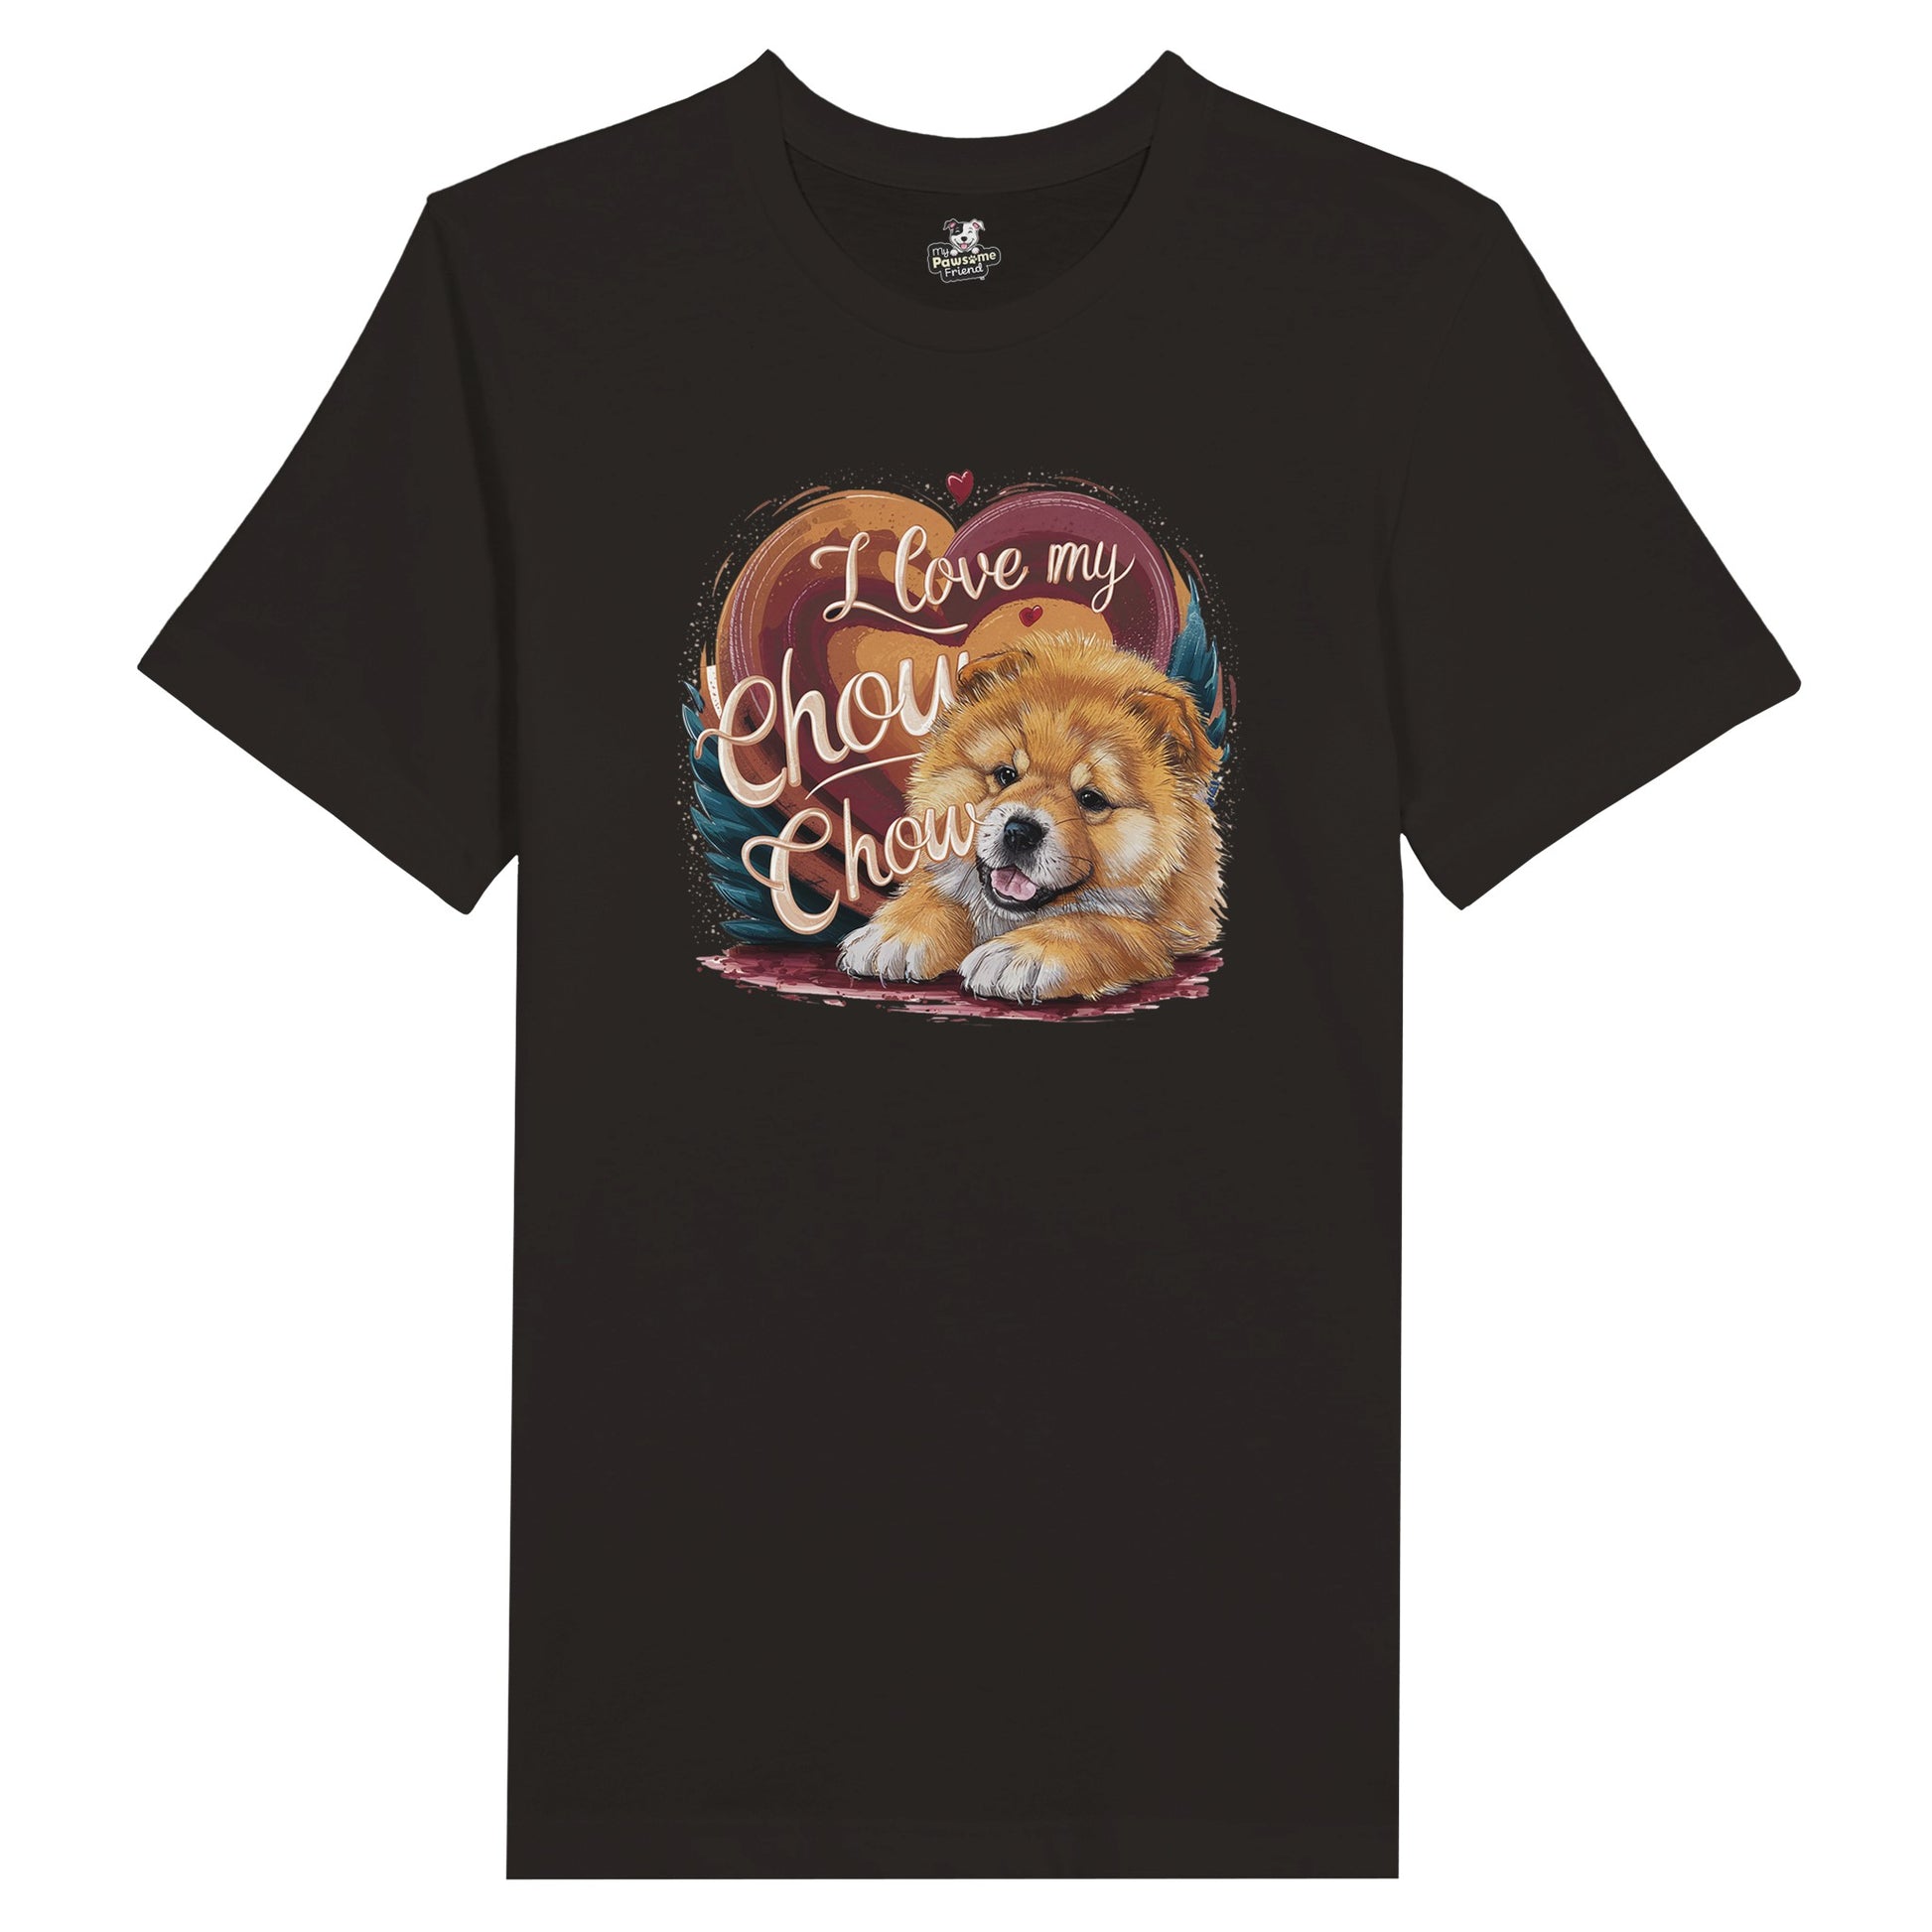 An unisex t shirt with a design with the phrase: "I love my Chow Chow" and a cute chow chow puppy. Shirt color is black